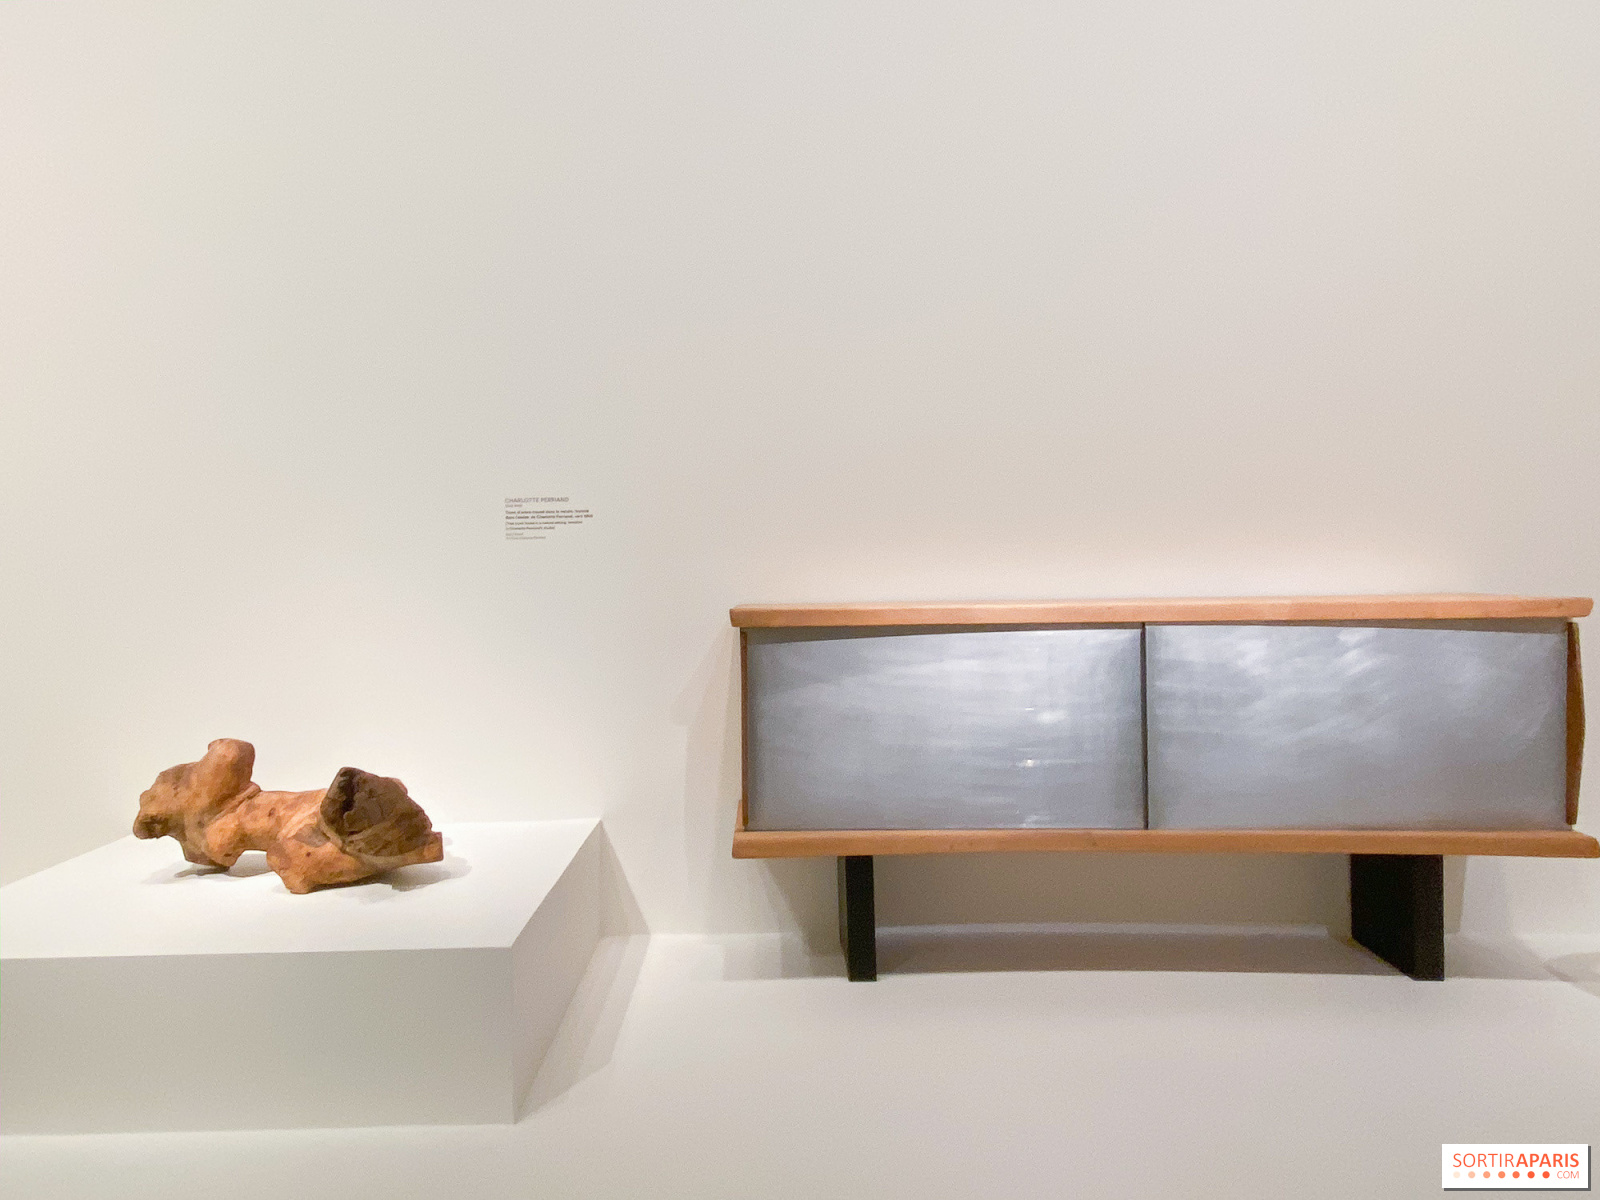 Exhibition Charlotte Perriand At Fondation Louis Vuitton in